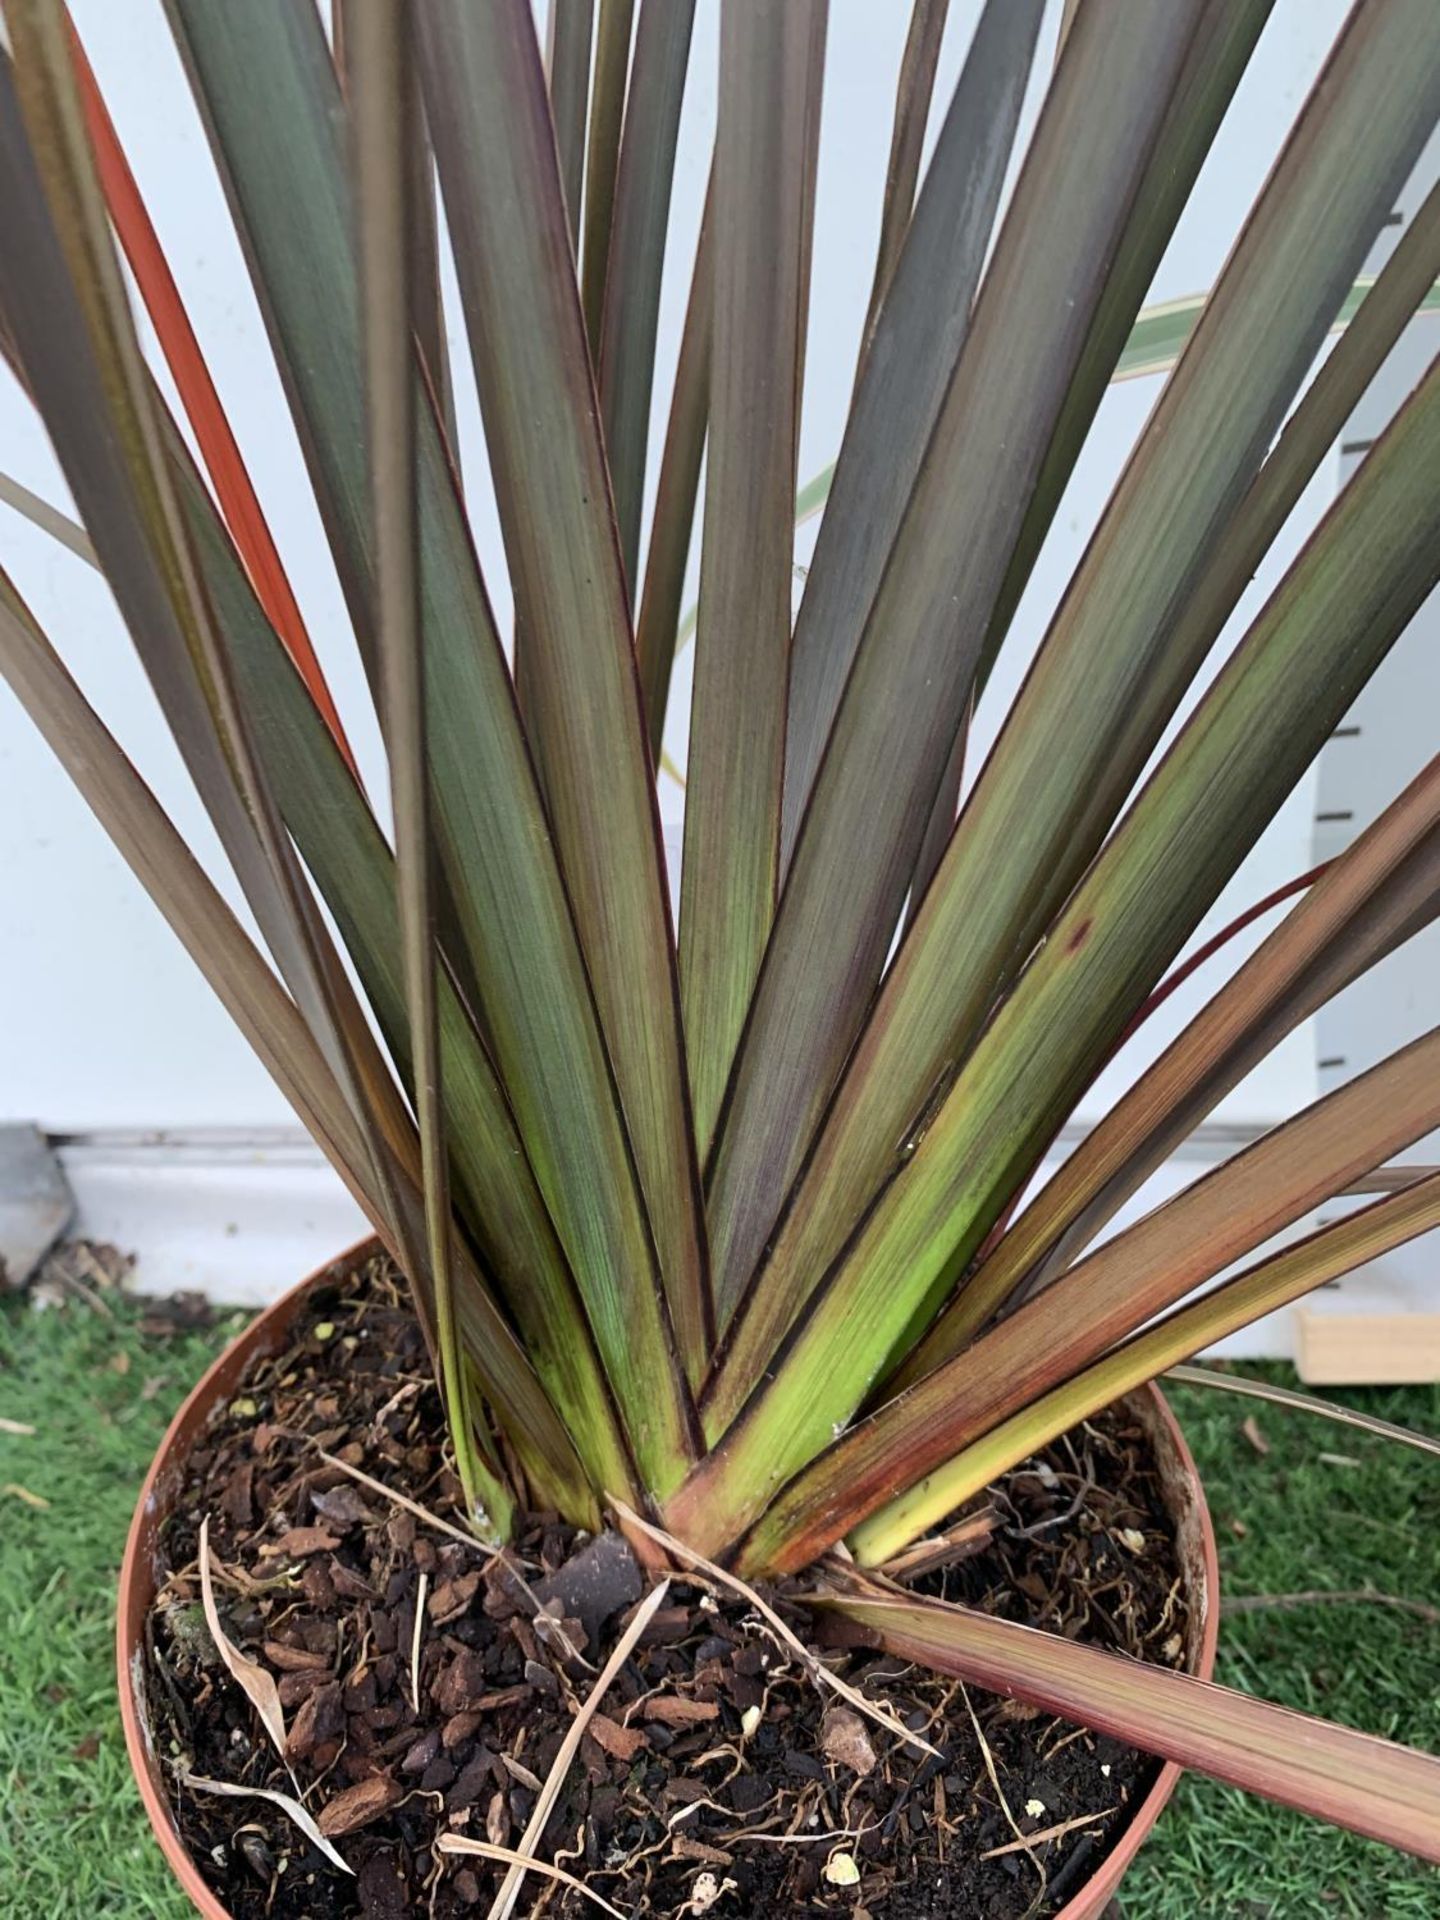 TWO PHORMIUM TENAX PLANTS 'CREAM DELIGHT' AND 'PLATTS BLACK' APPROX ONE METRE IN HEIGHT IN 3LTR POTS - Image 5 of 5